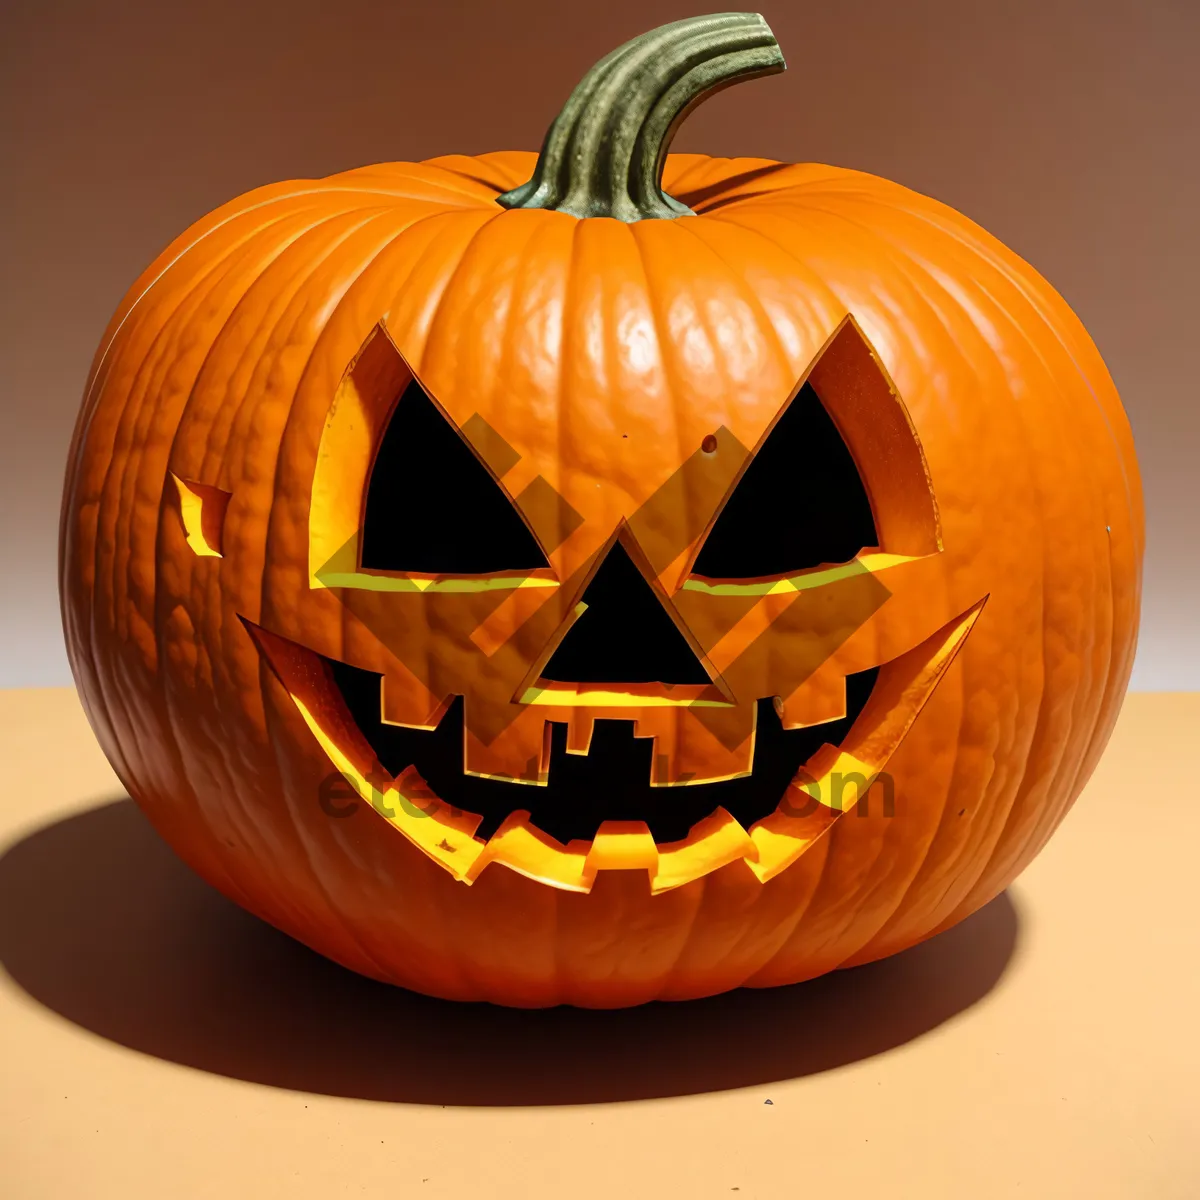 Picture of Spooky Harvest: Carved Jack-o'-Lantern Pumpkin and Candle